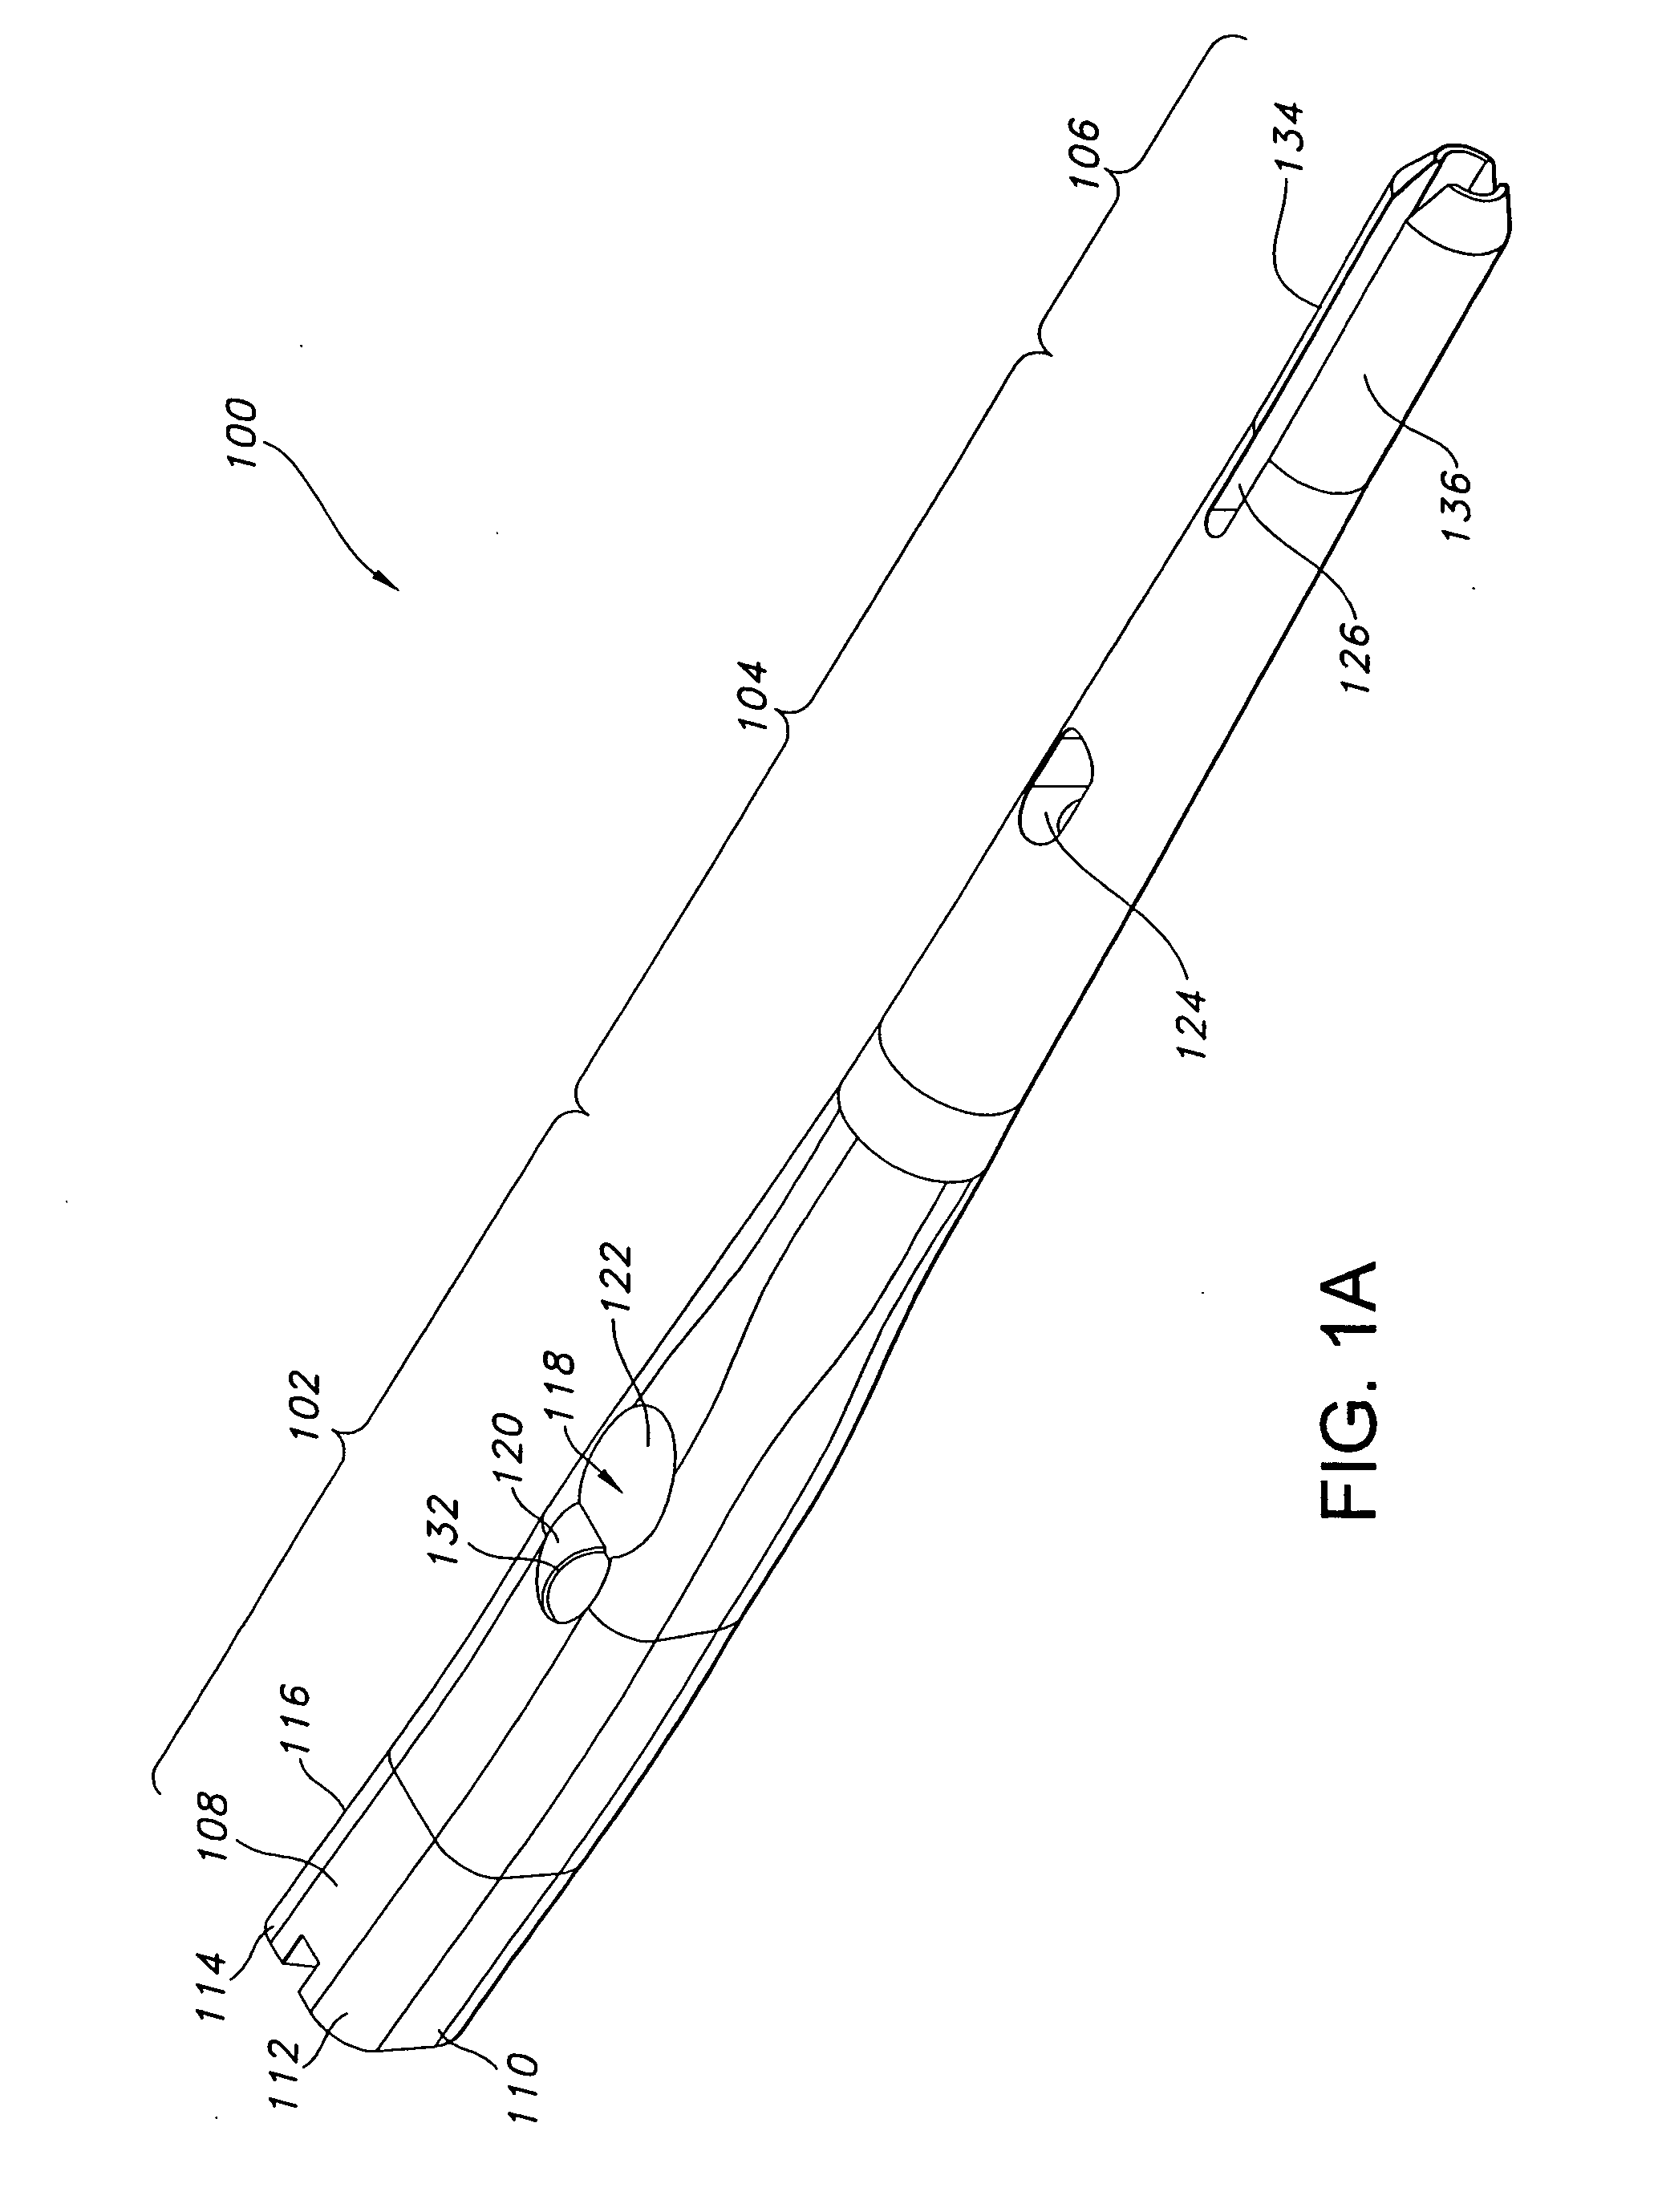 Orthopaedic implant and screw assembly